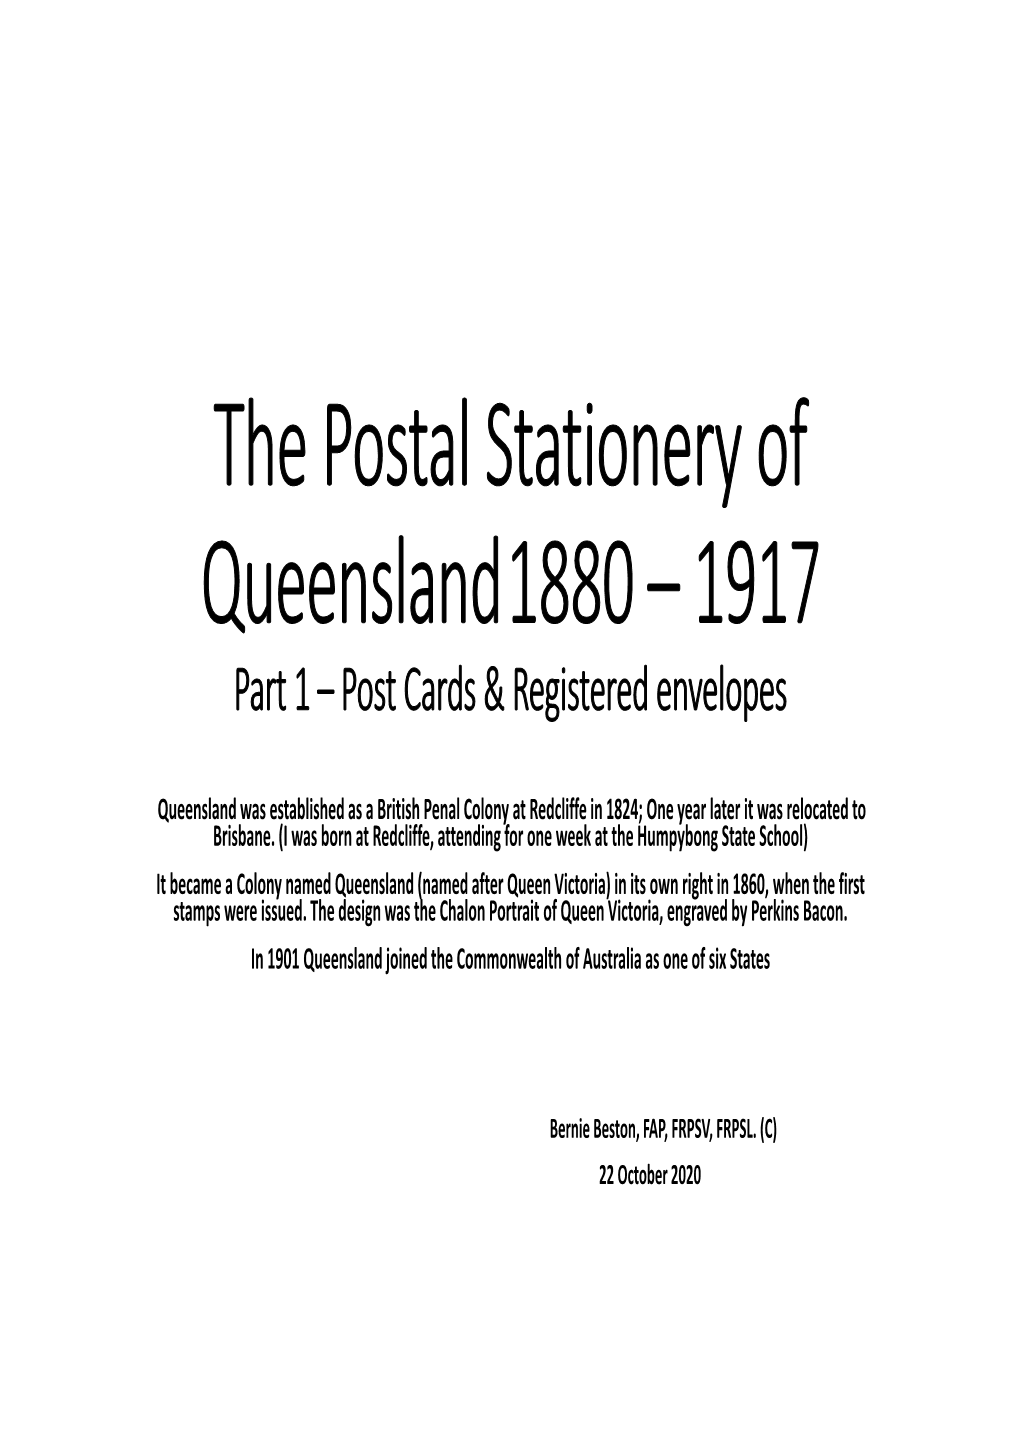 Queensland Postal Stationery Was Published by Phil Collas in 1979